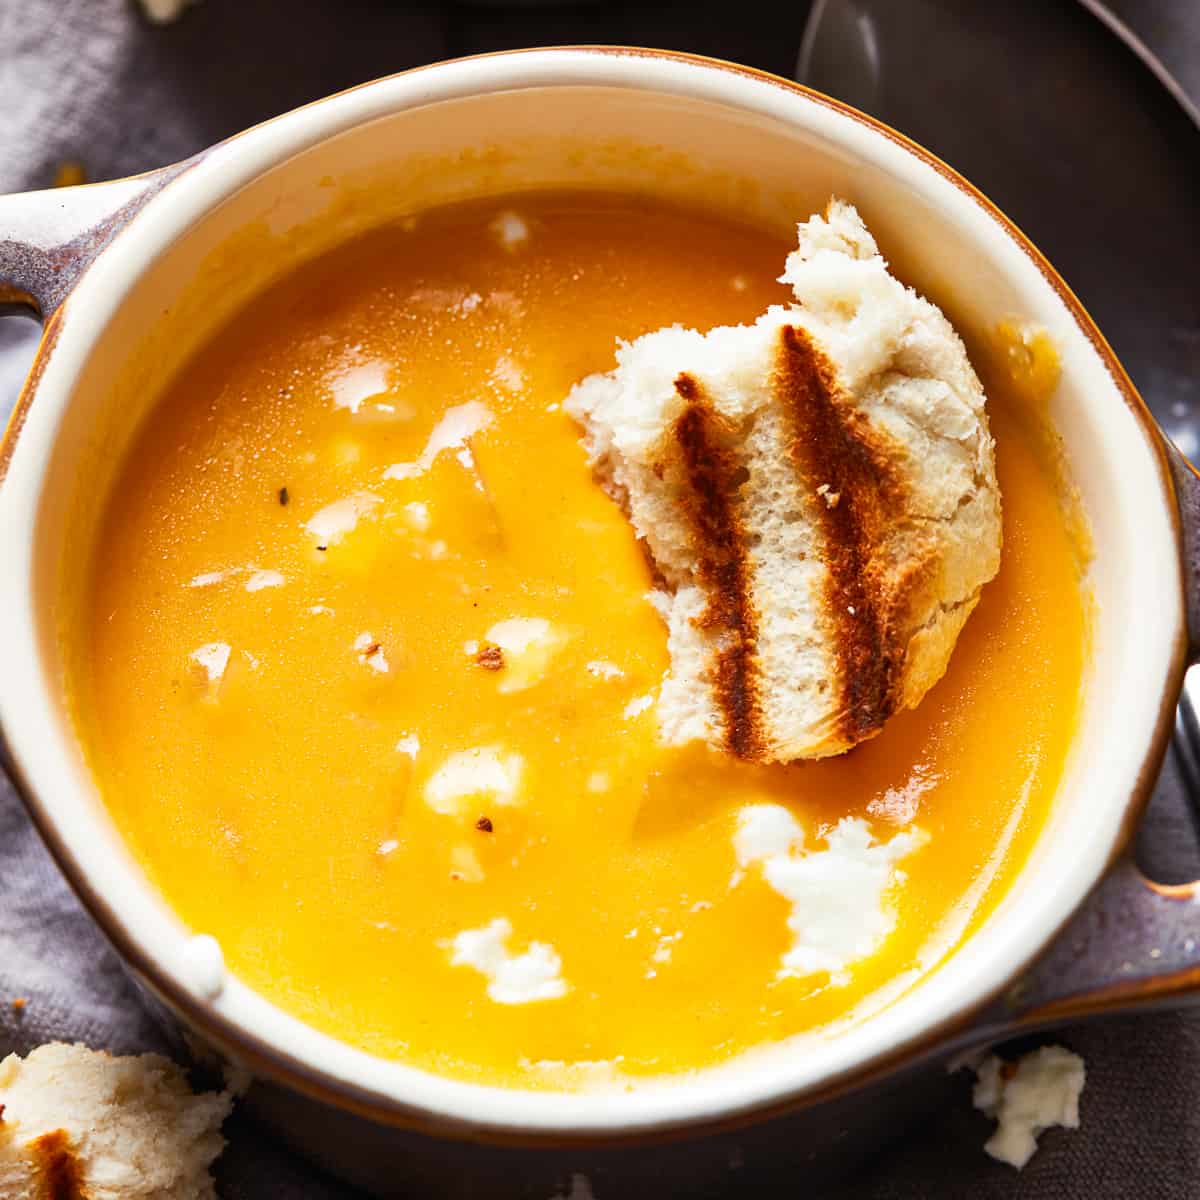 https://www.thecookierookie.com/wp-content/uploads/2022/05/featured-beer-cheese-soup-recipe.jpg